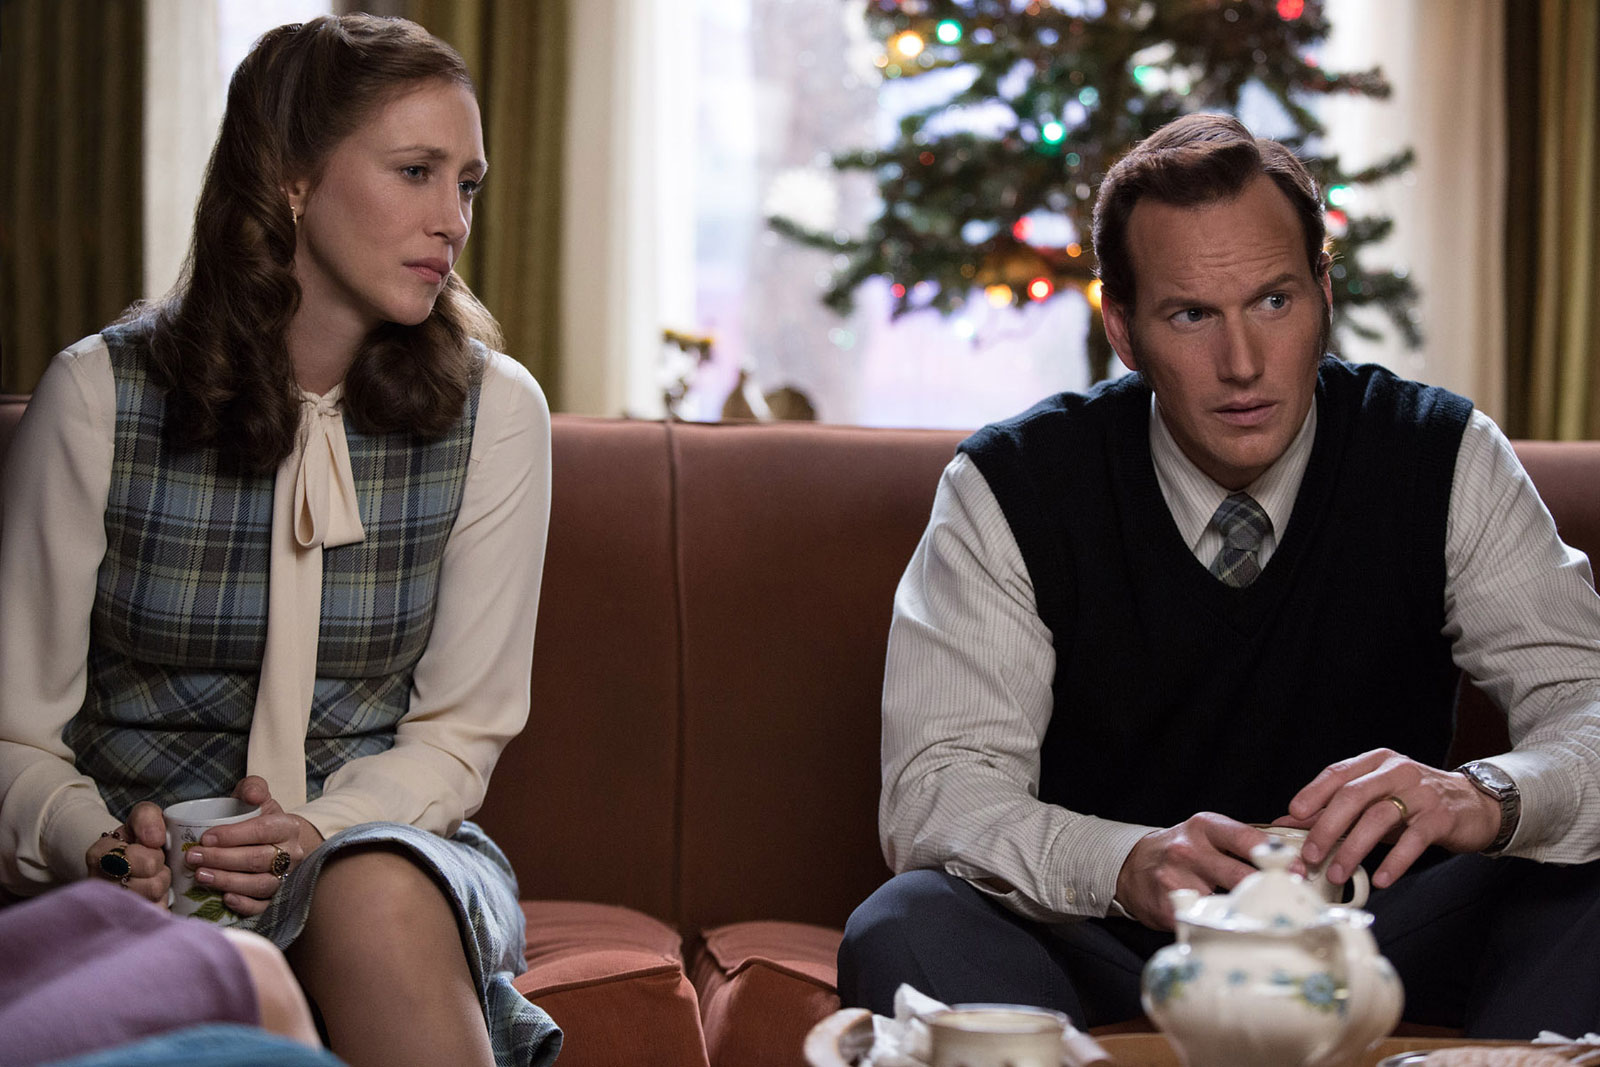 THE CONJURING 2 – Releasing in June